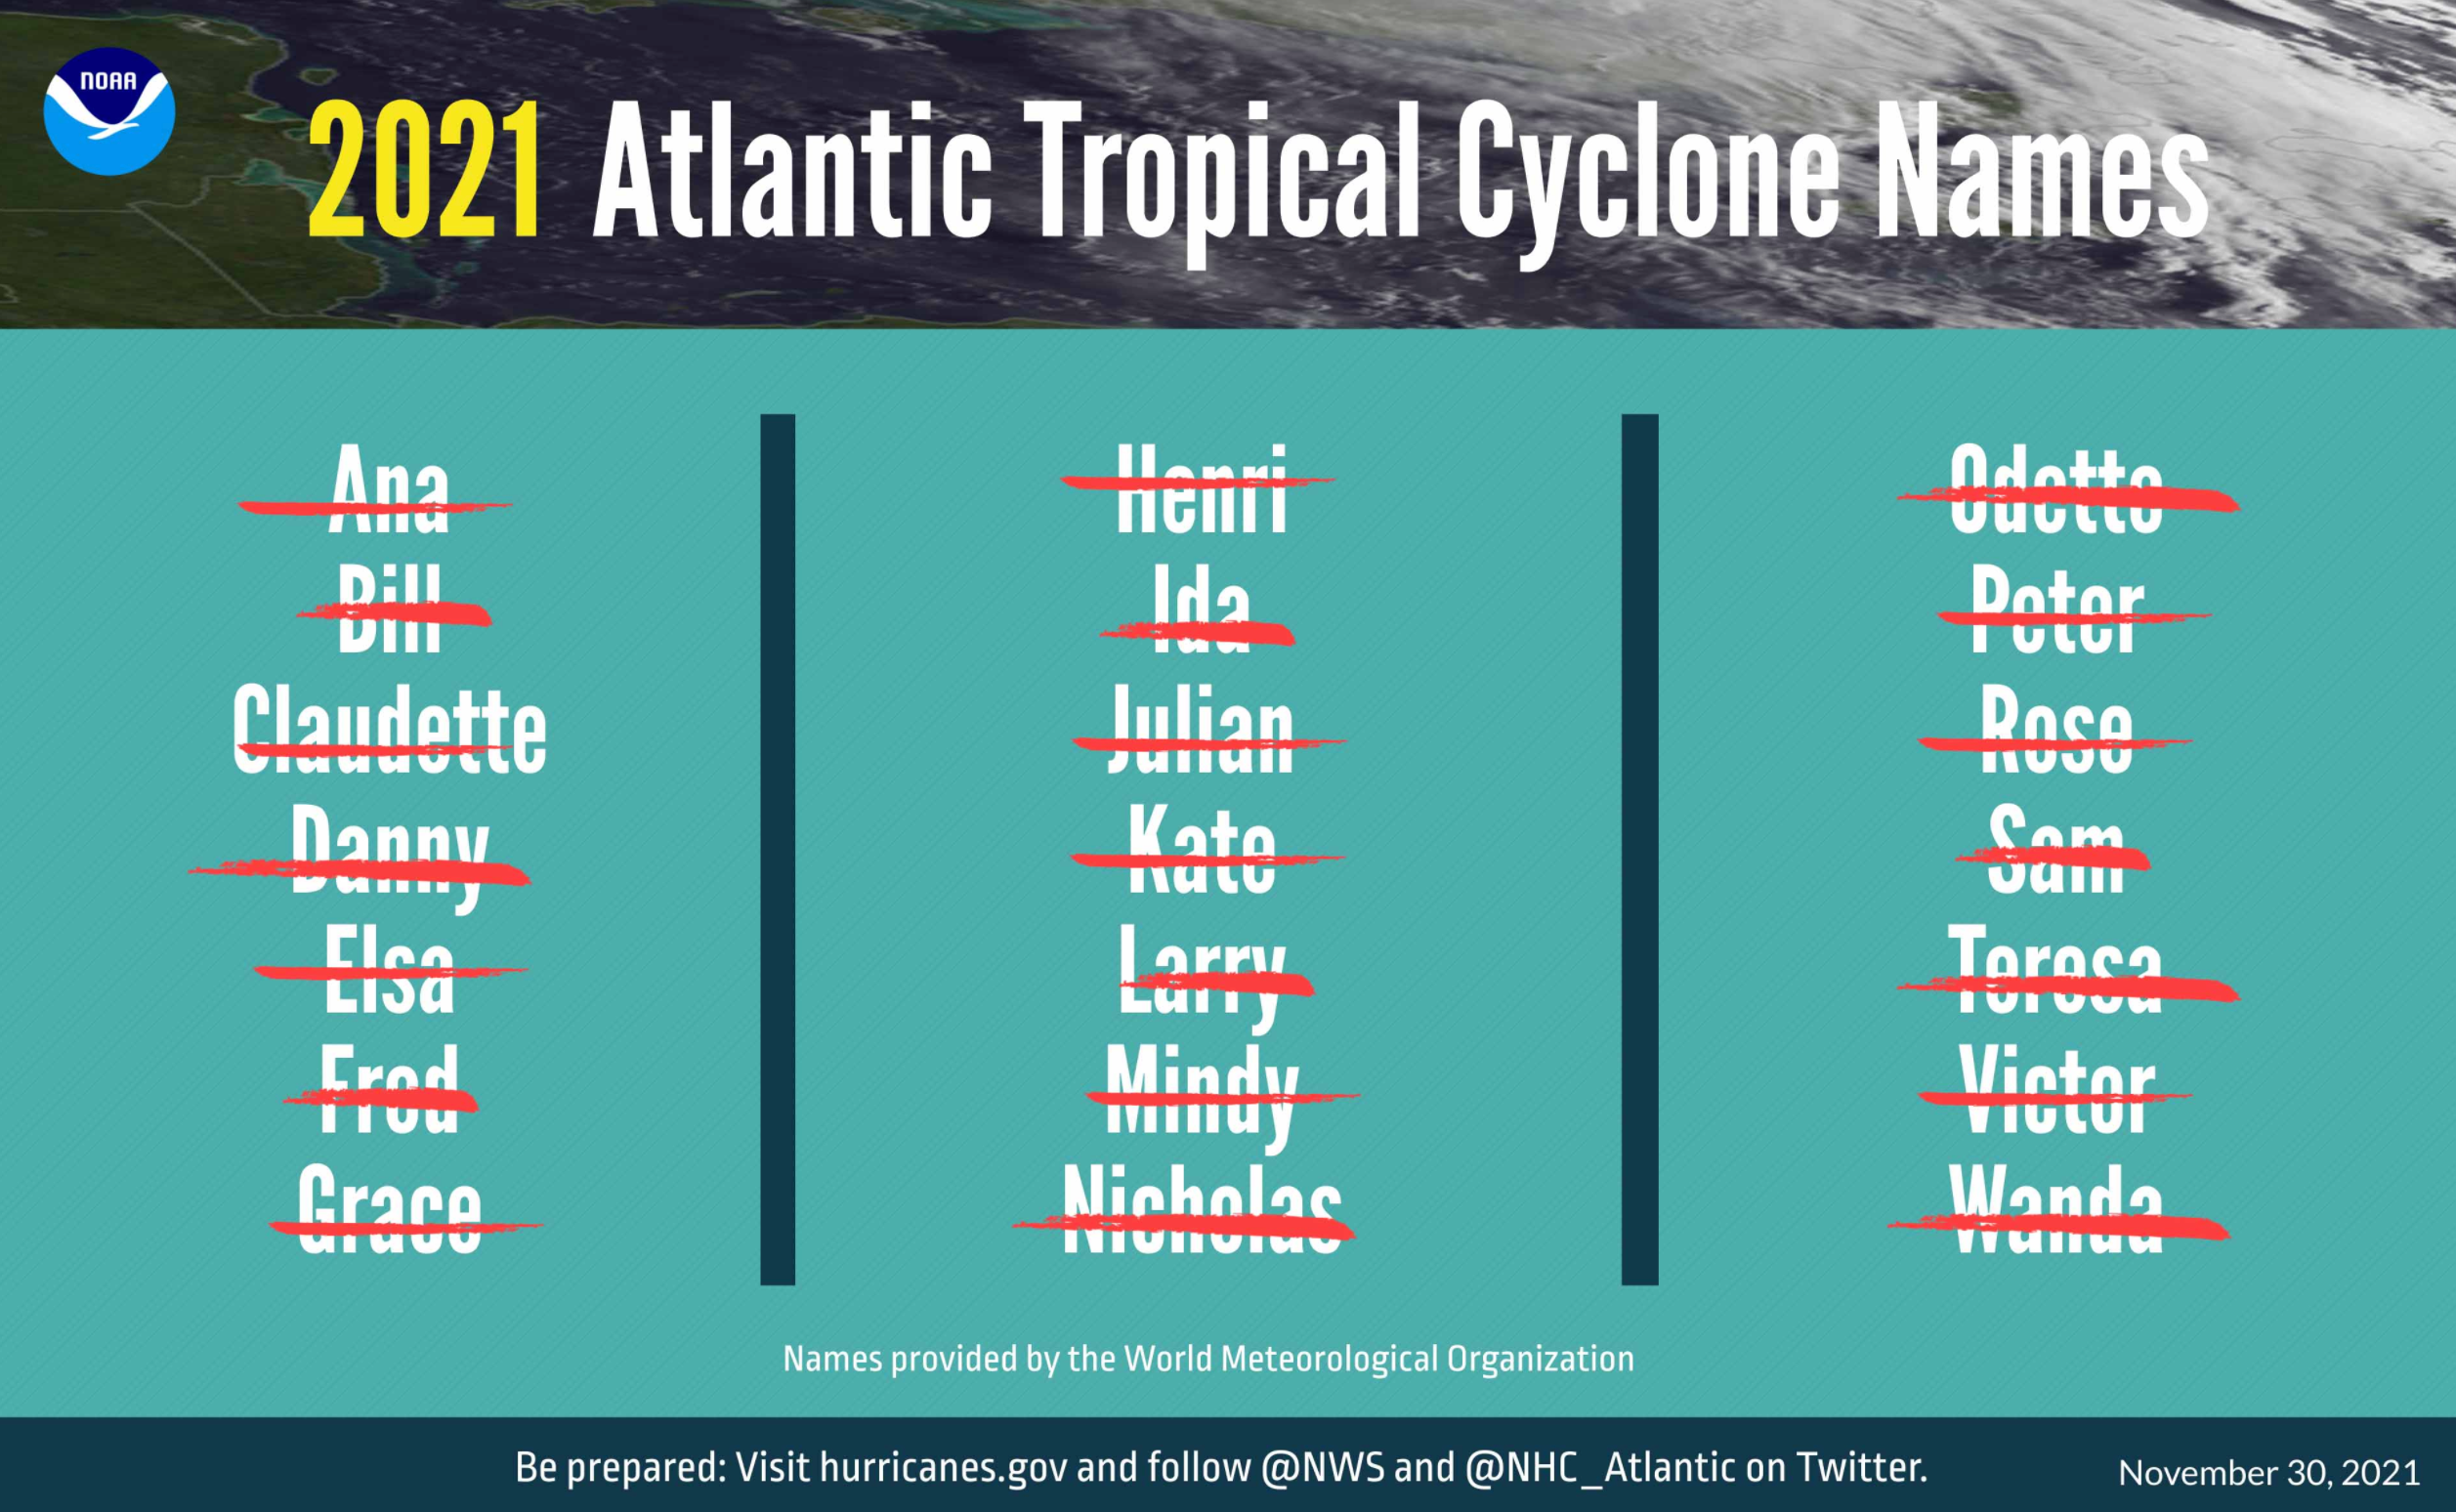 The list of 21 named storms that have occurred during the 2021 Atlantic Hurricane Season. The season officially ends November 30